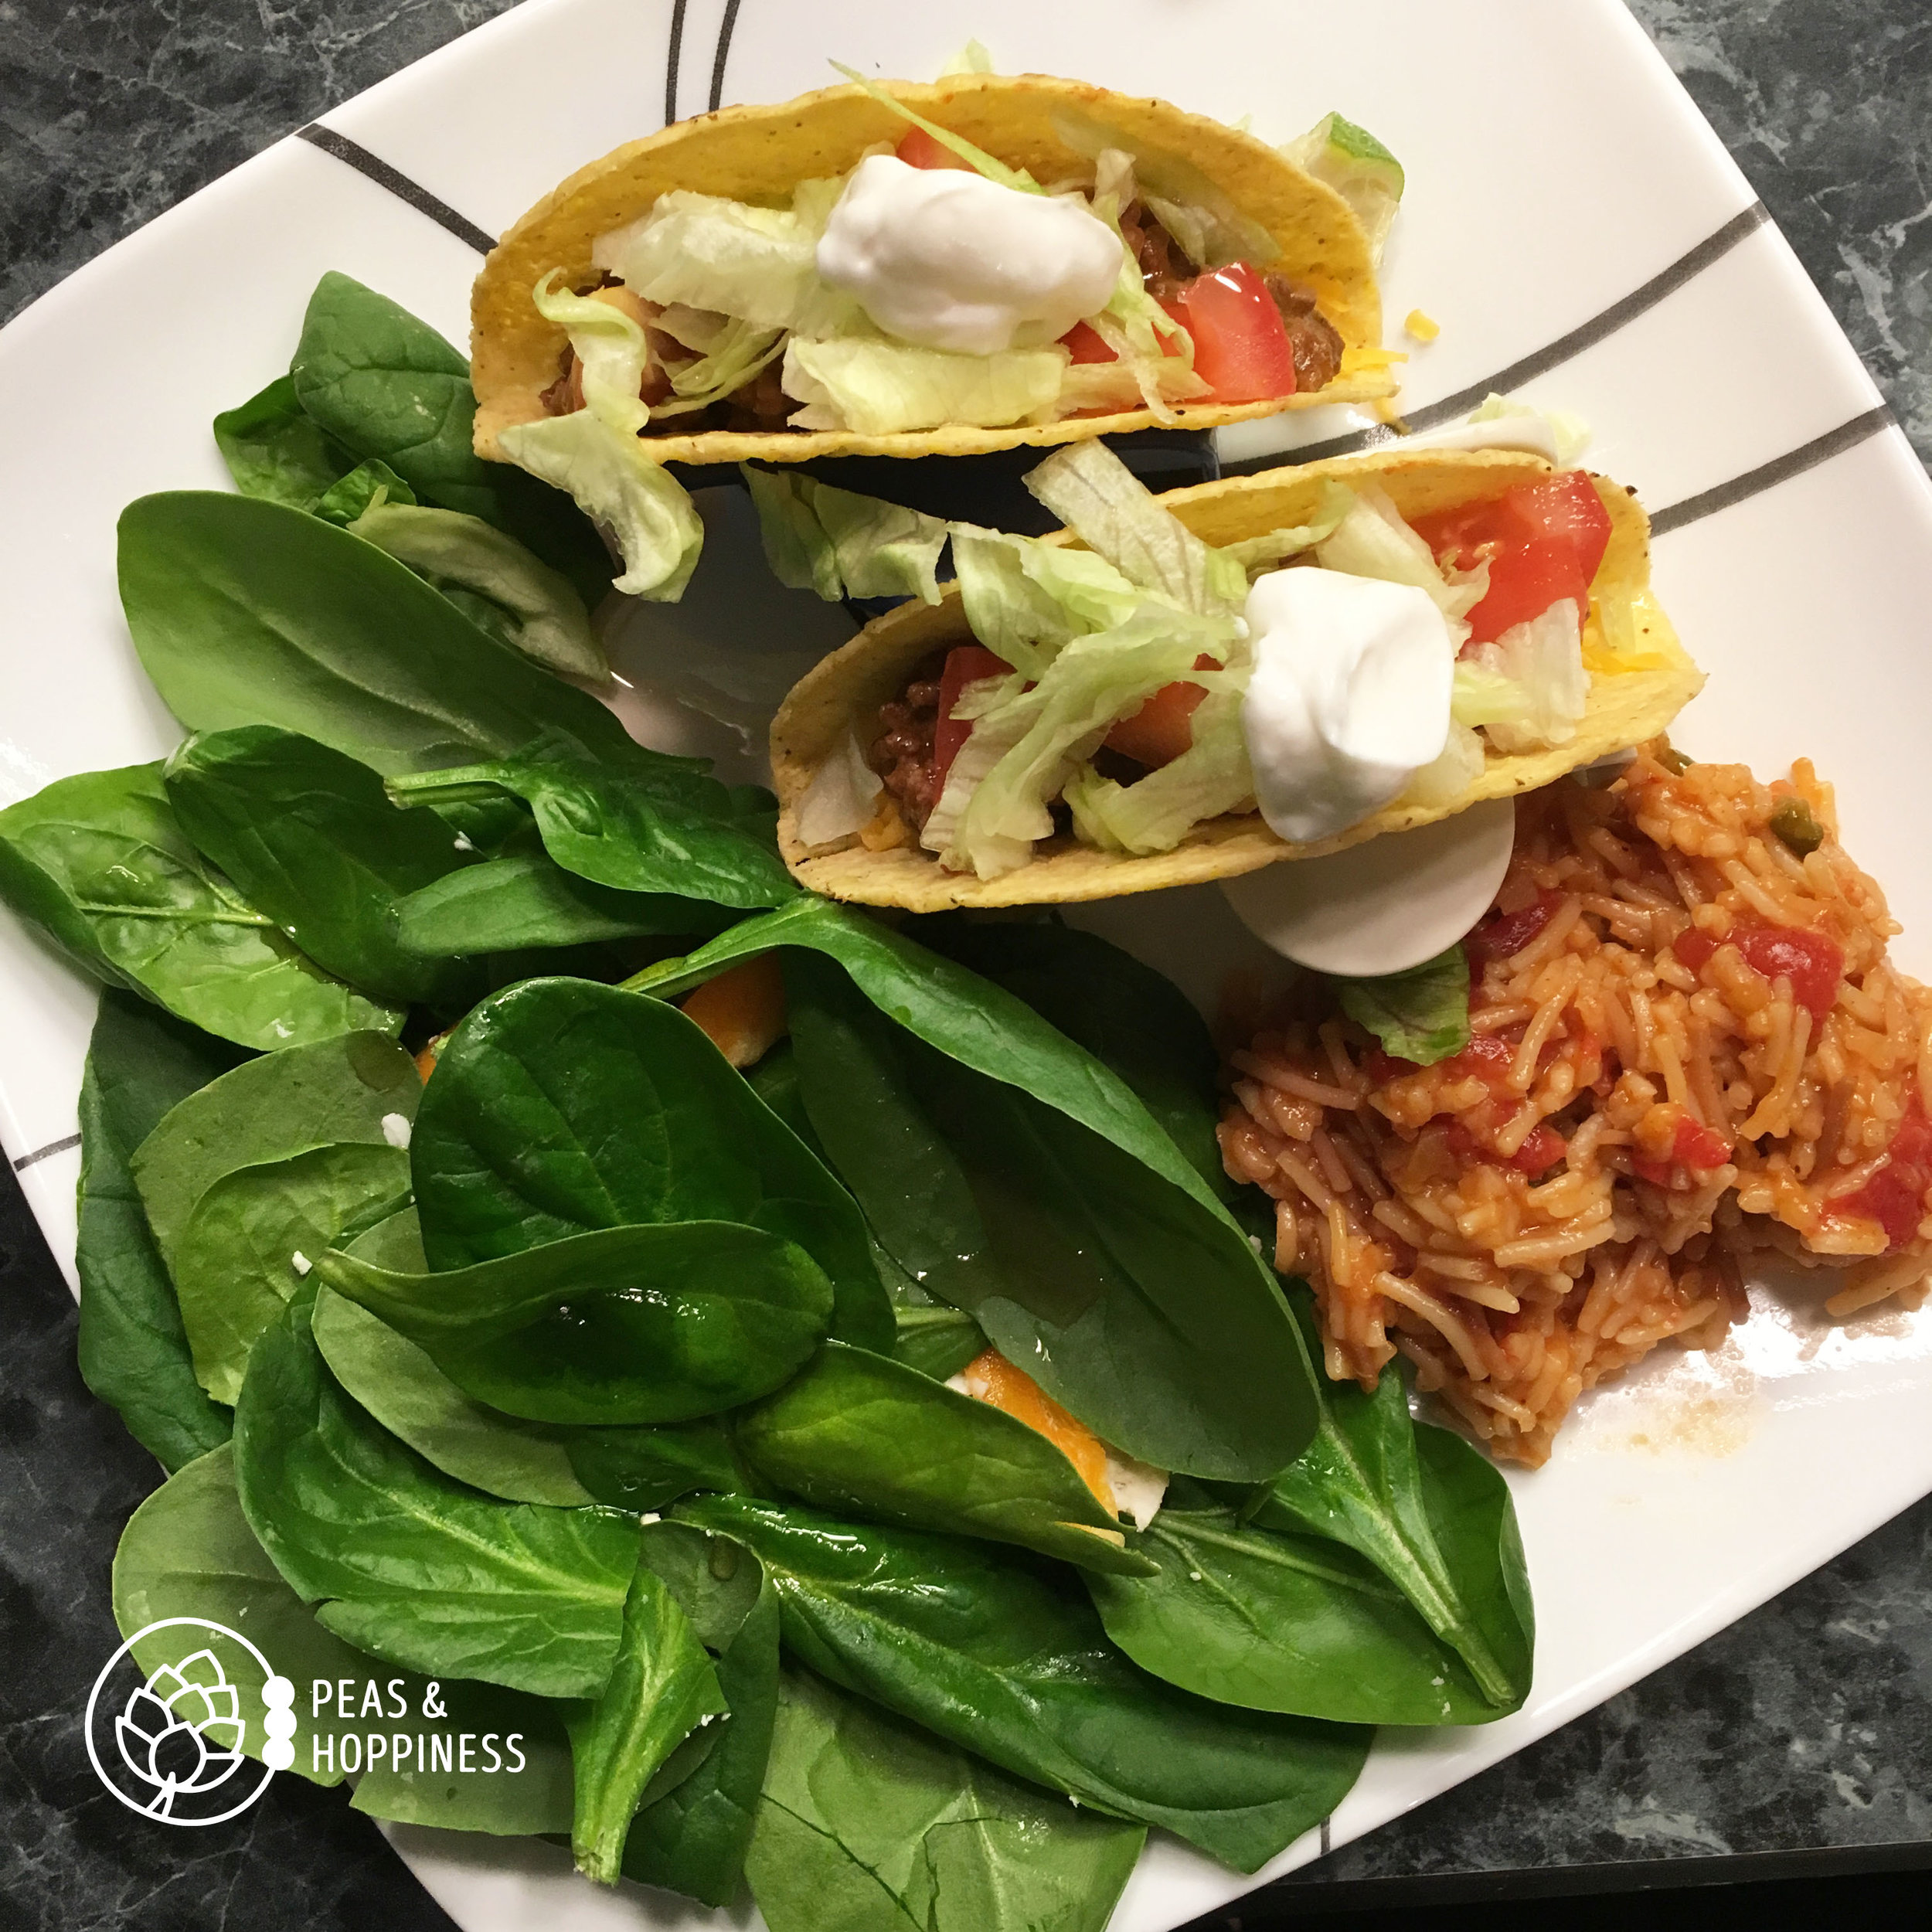 Taco Tuesday with a beautiful spinach salad!